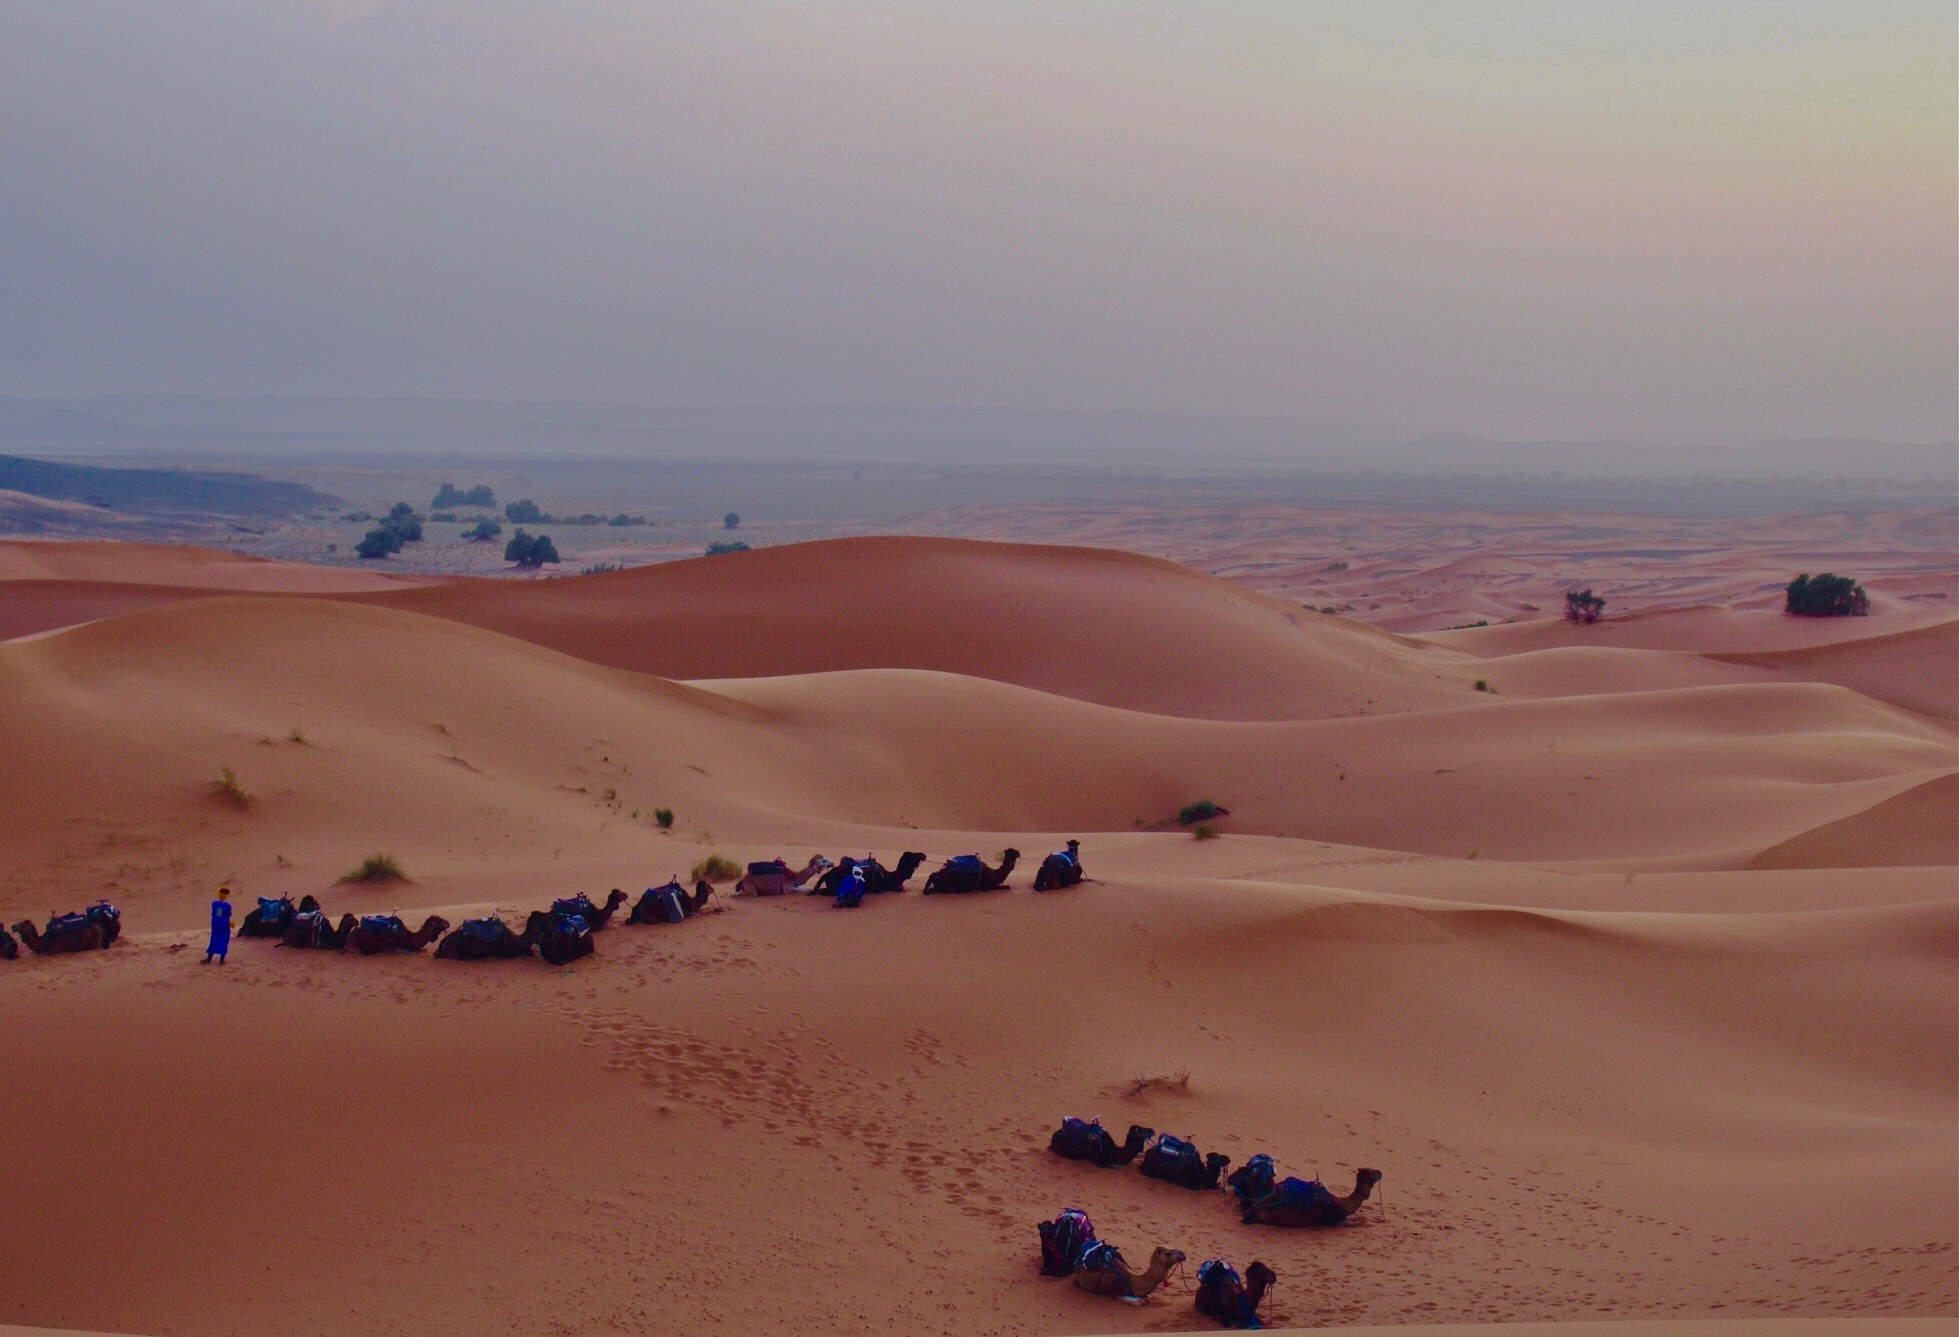 Sand dunes with camels in the Moroccan Sahara desert.